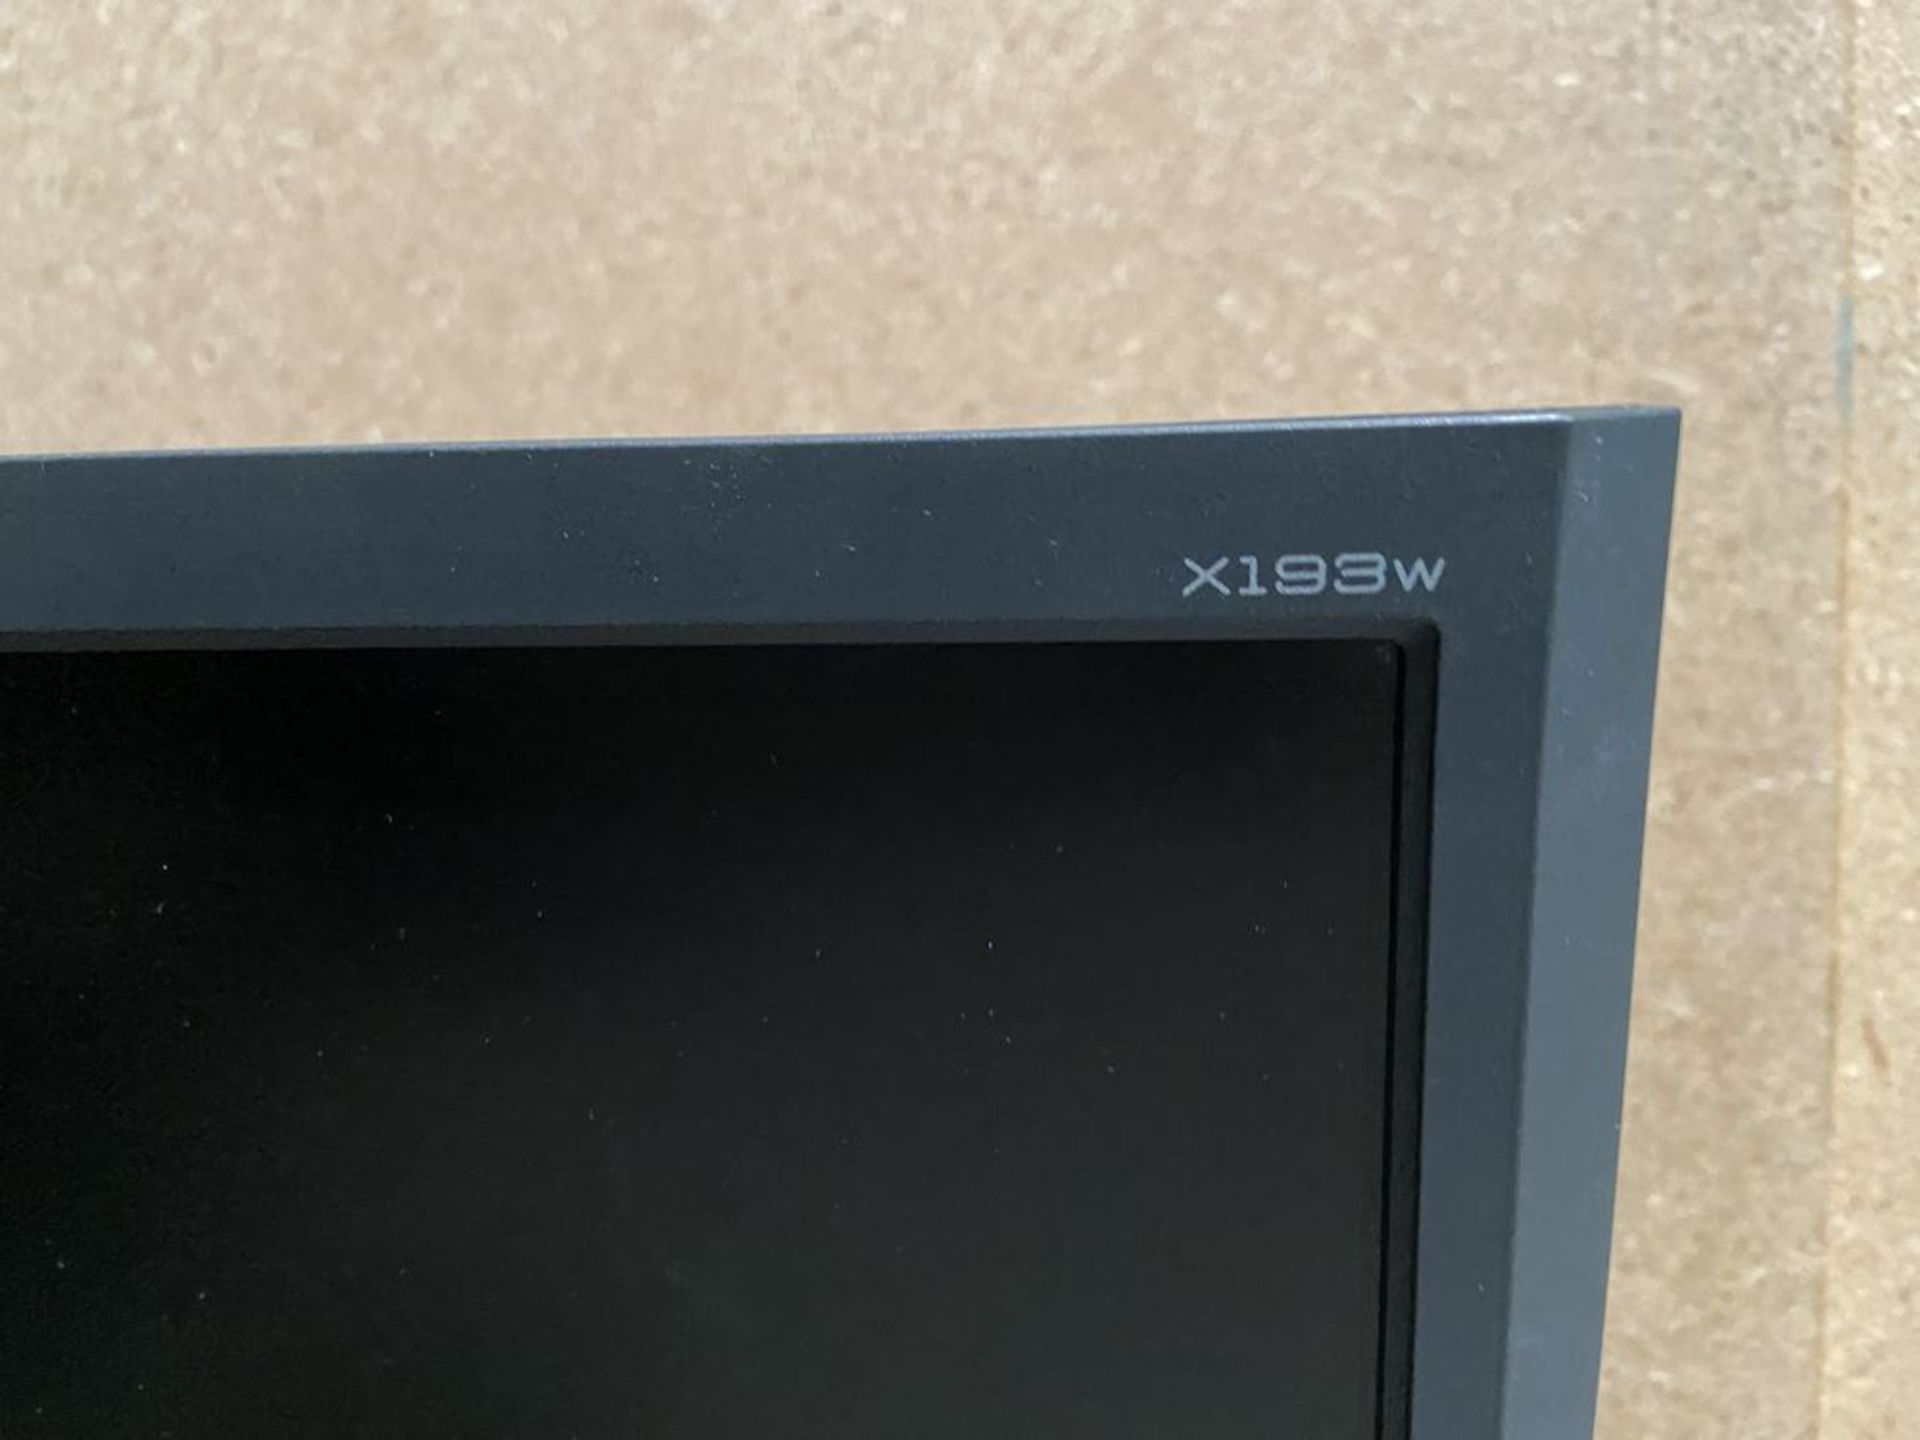 Acer x193w Monitor - Image 3 of 4